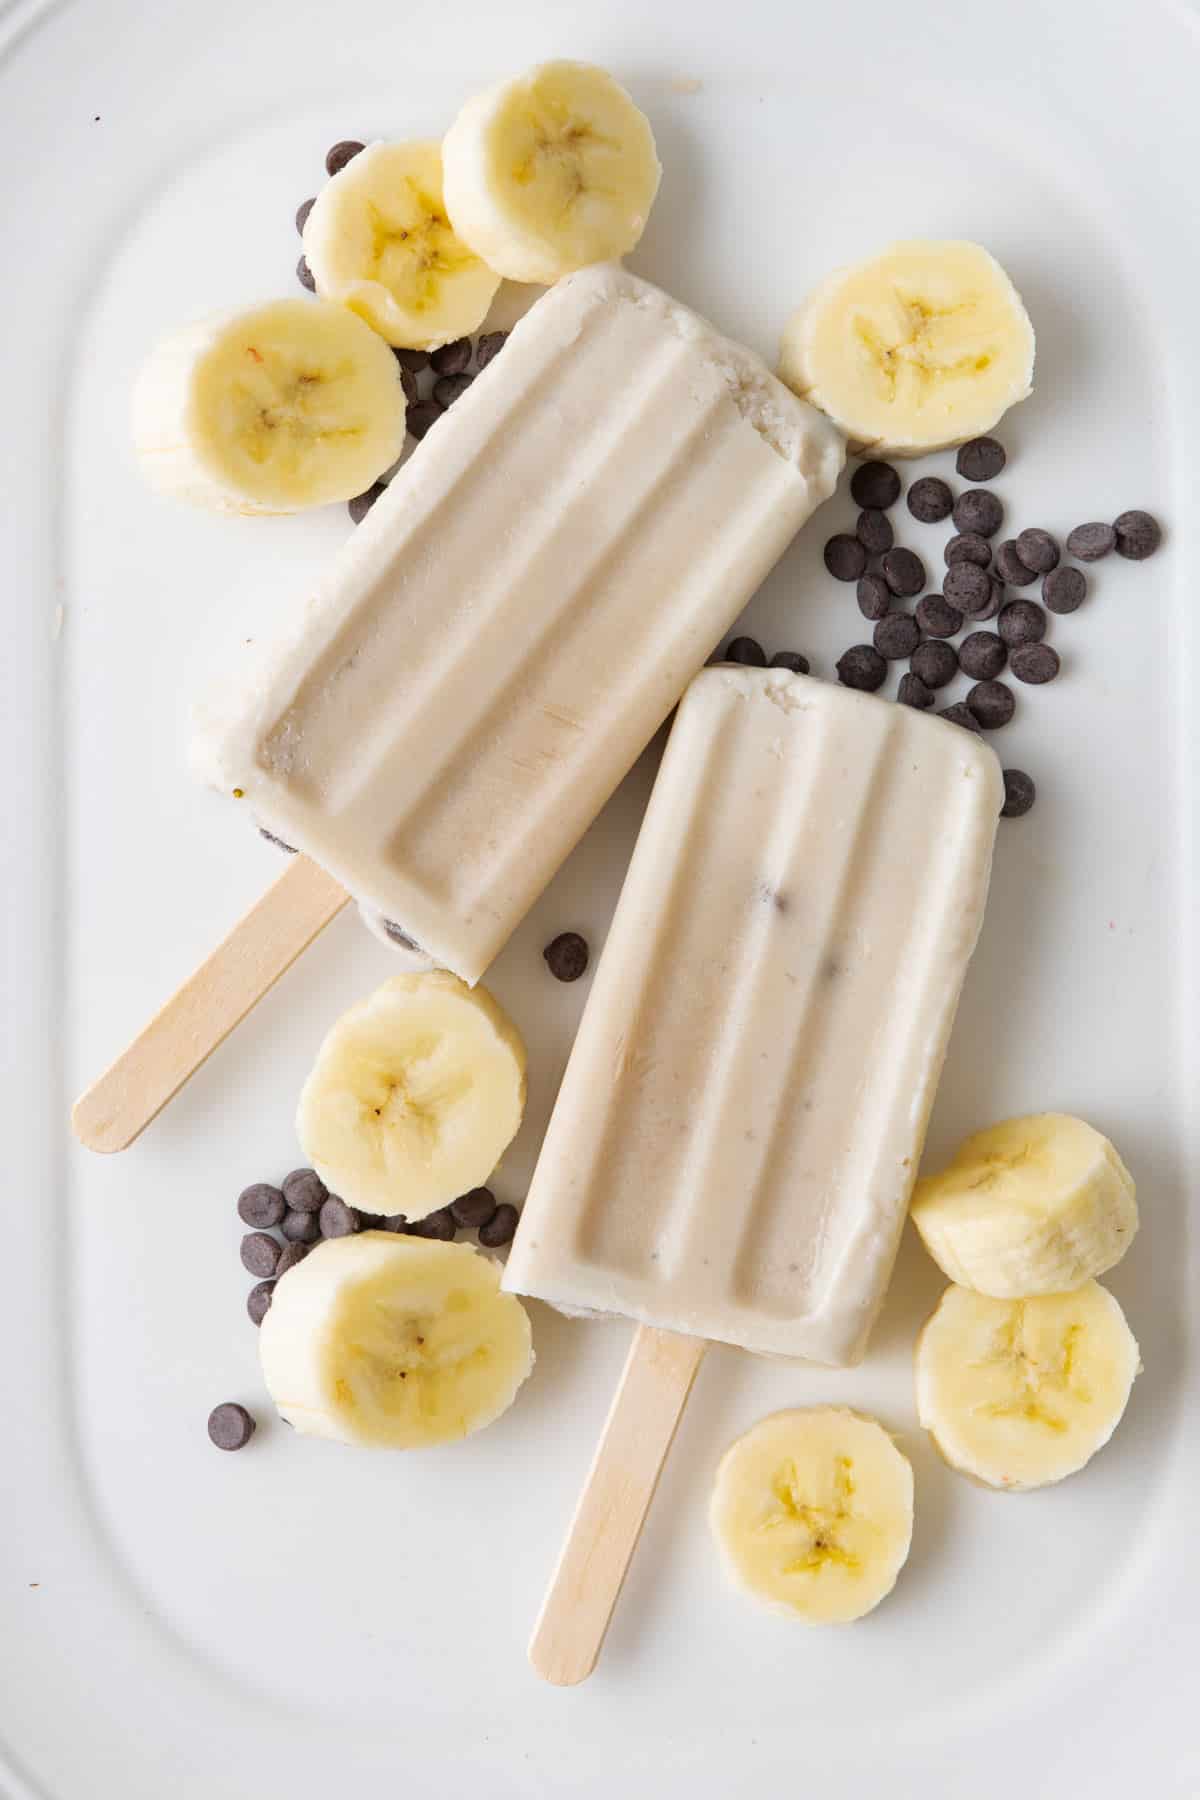 Frozen Banoffee pie popsicles on a large platter with sliced bananas and chocolate chips around.